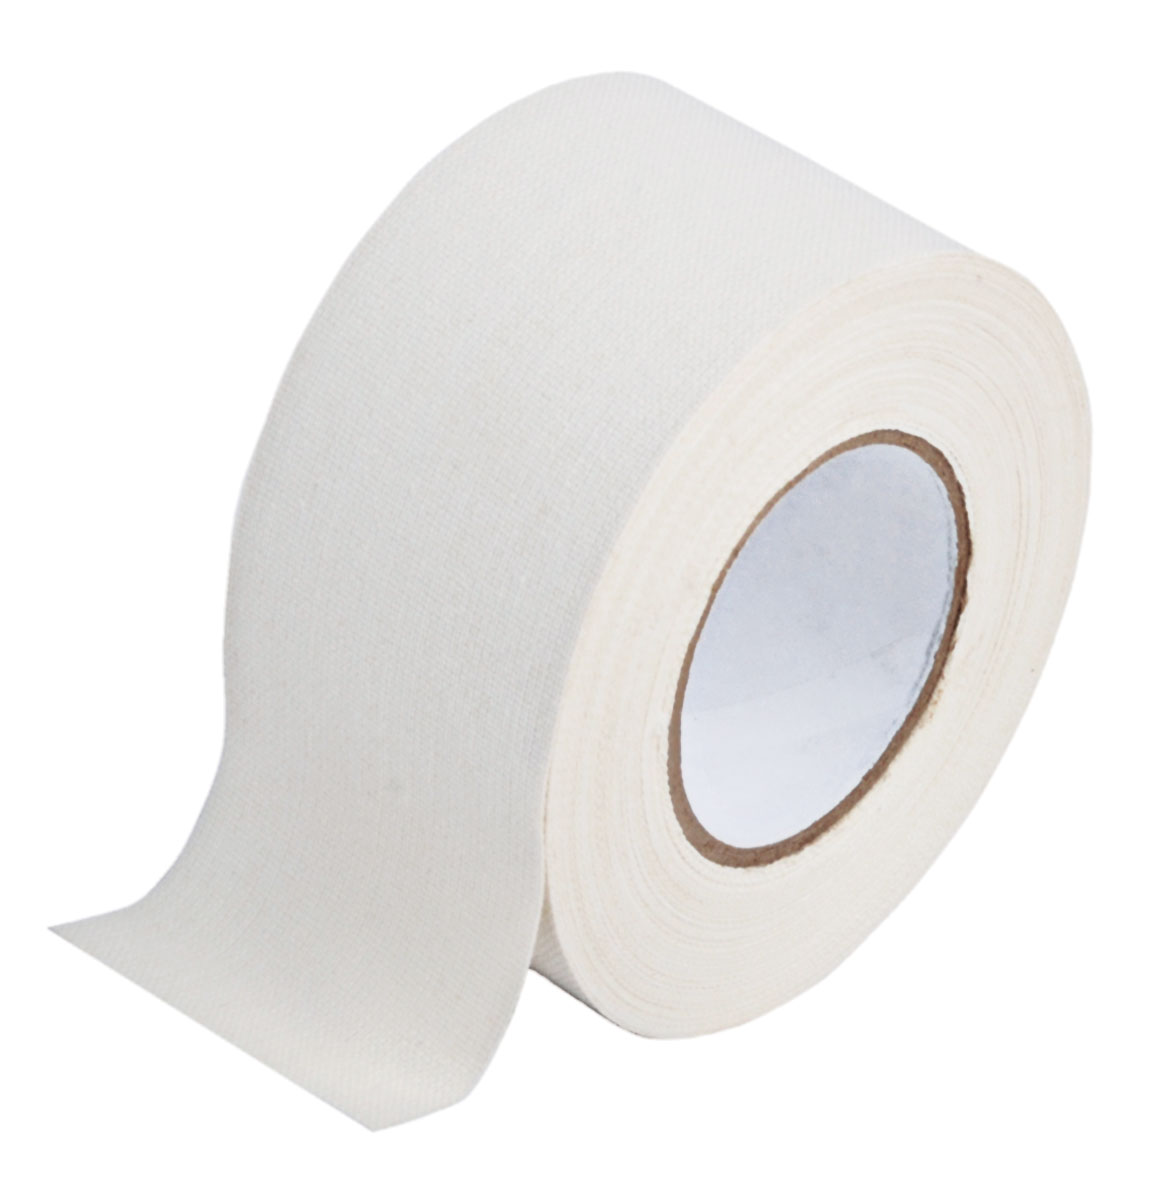 Buy Trainers' Tape - Cotton Cloth from Canada